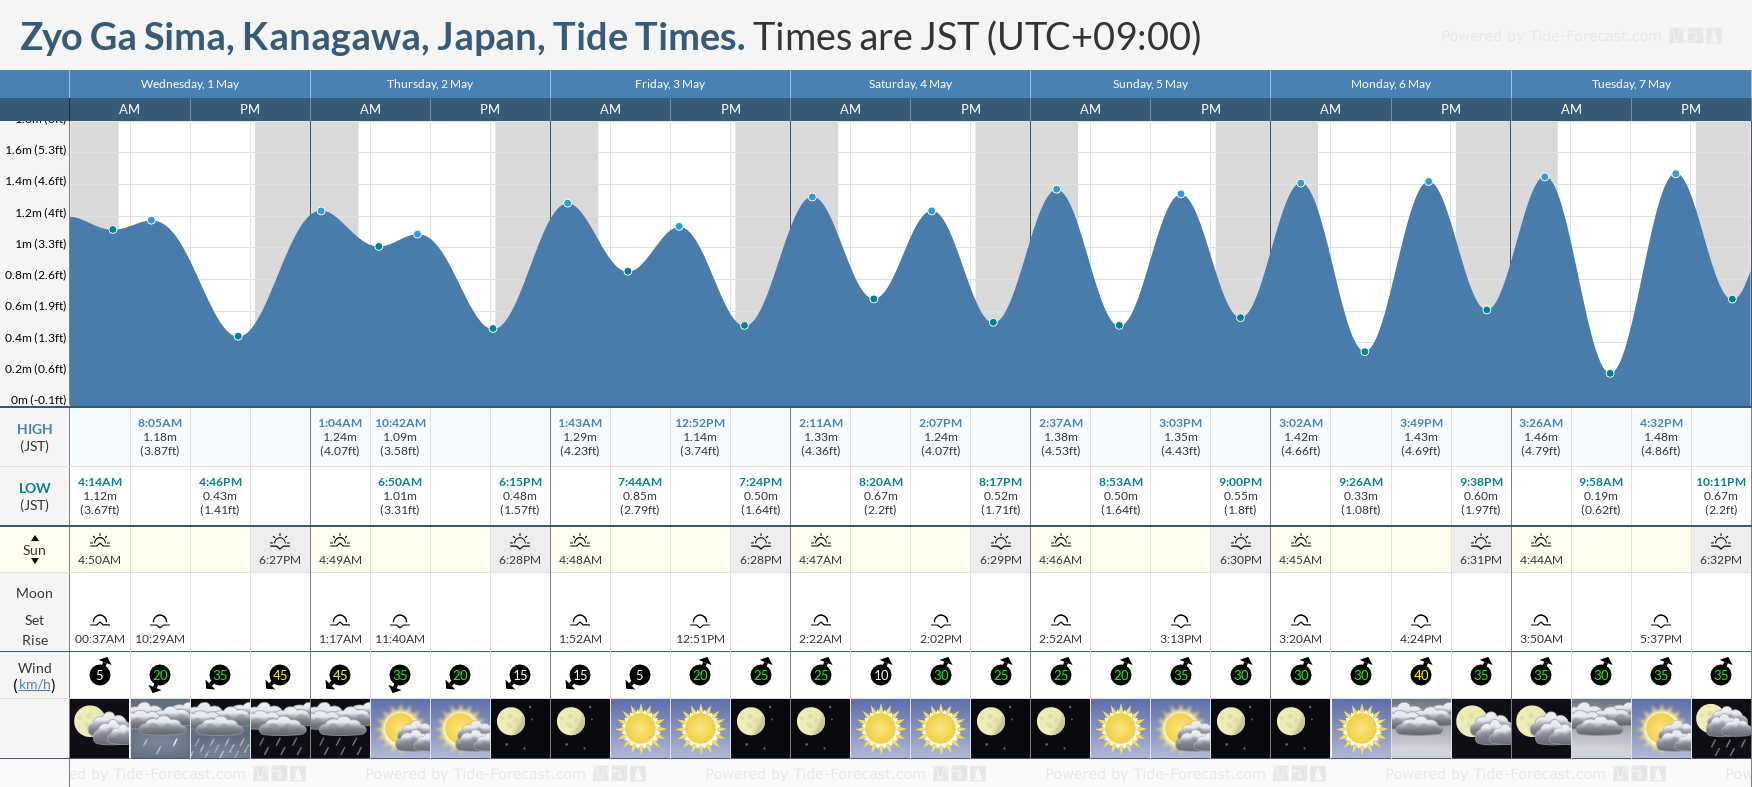 Zyo Ga Sima, Kanagawa, Japan Tide Chart including high and low tide tide times for the next 7 days